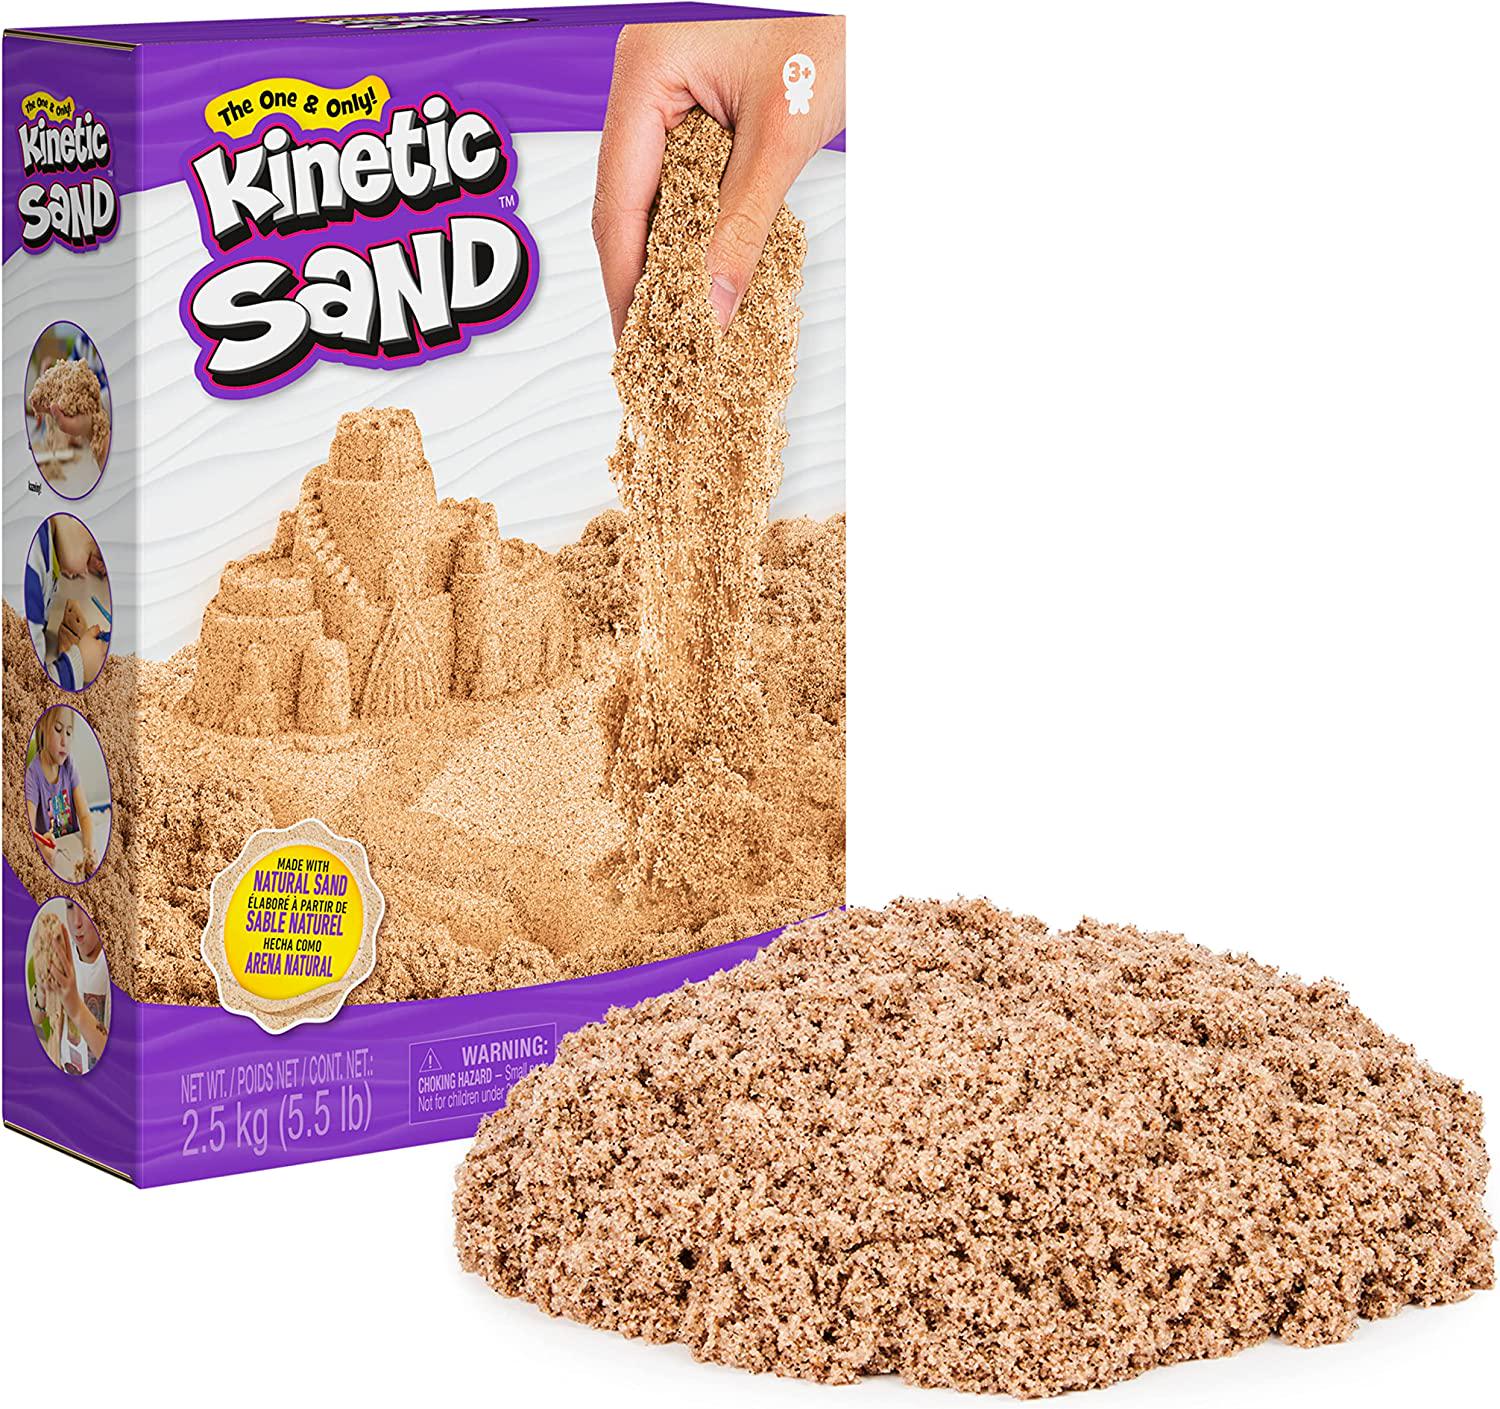 Kinetic Sand, Kinetic Sand, 2.5kg (5.5lb) of All-Natural Brown Sensory Toys Play Sand for Mixing, Molding and Creating